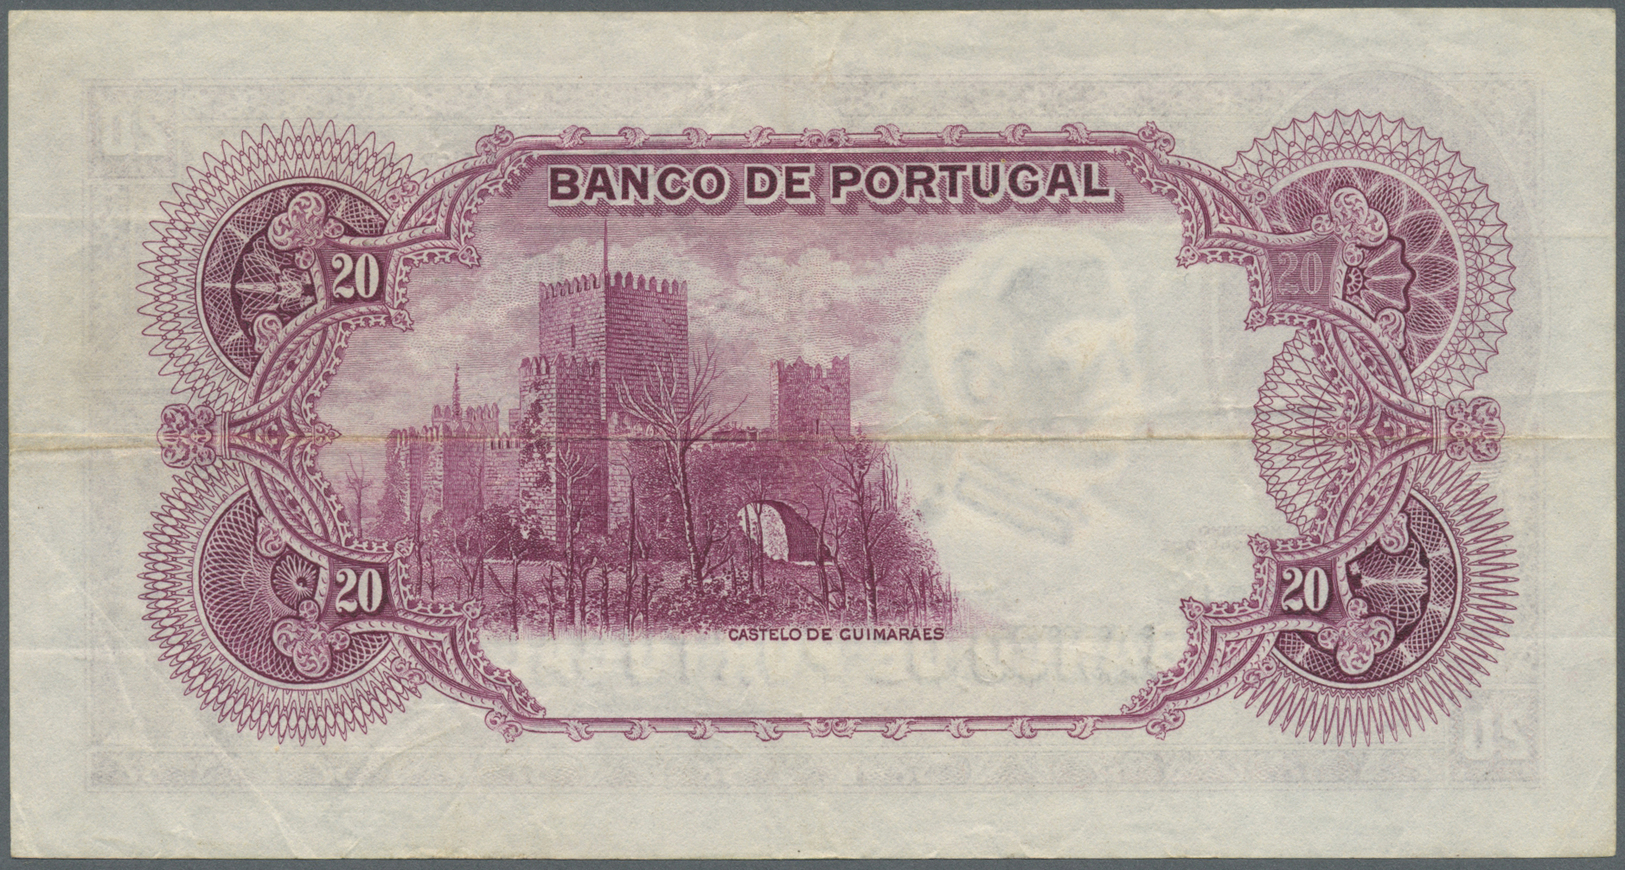 02007 Portugal: 20 Escudos 1940 P. 143, Used With Folds In Paper But No Holes Or Tears, Paper Very Crisp And Colors Orig - Portugal